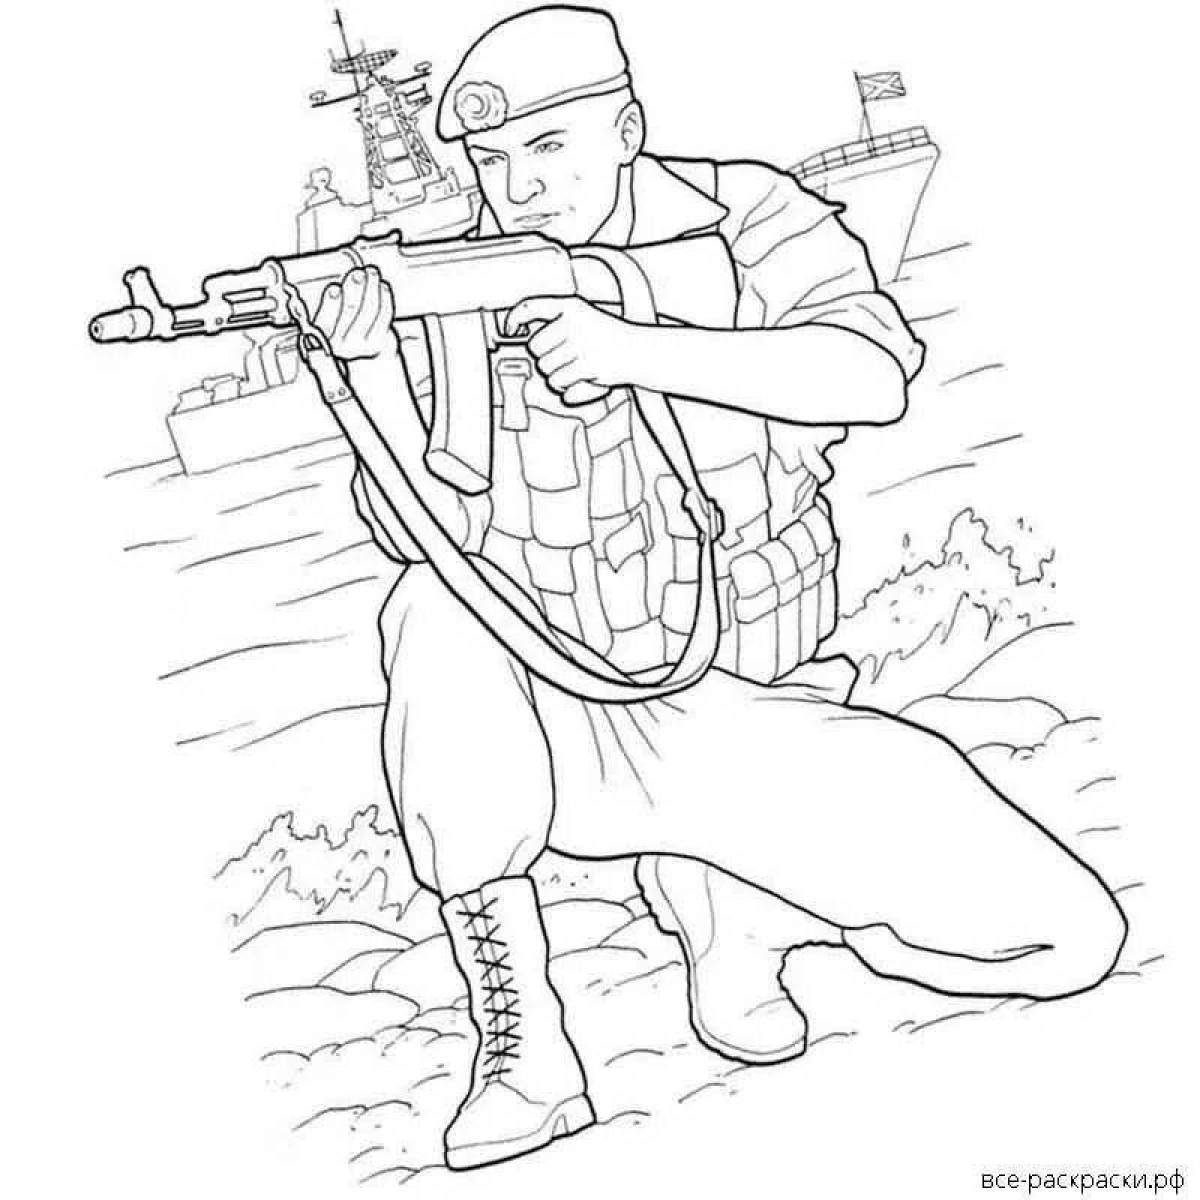 Great soviet soldier coloring book